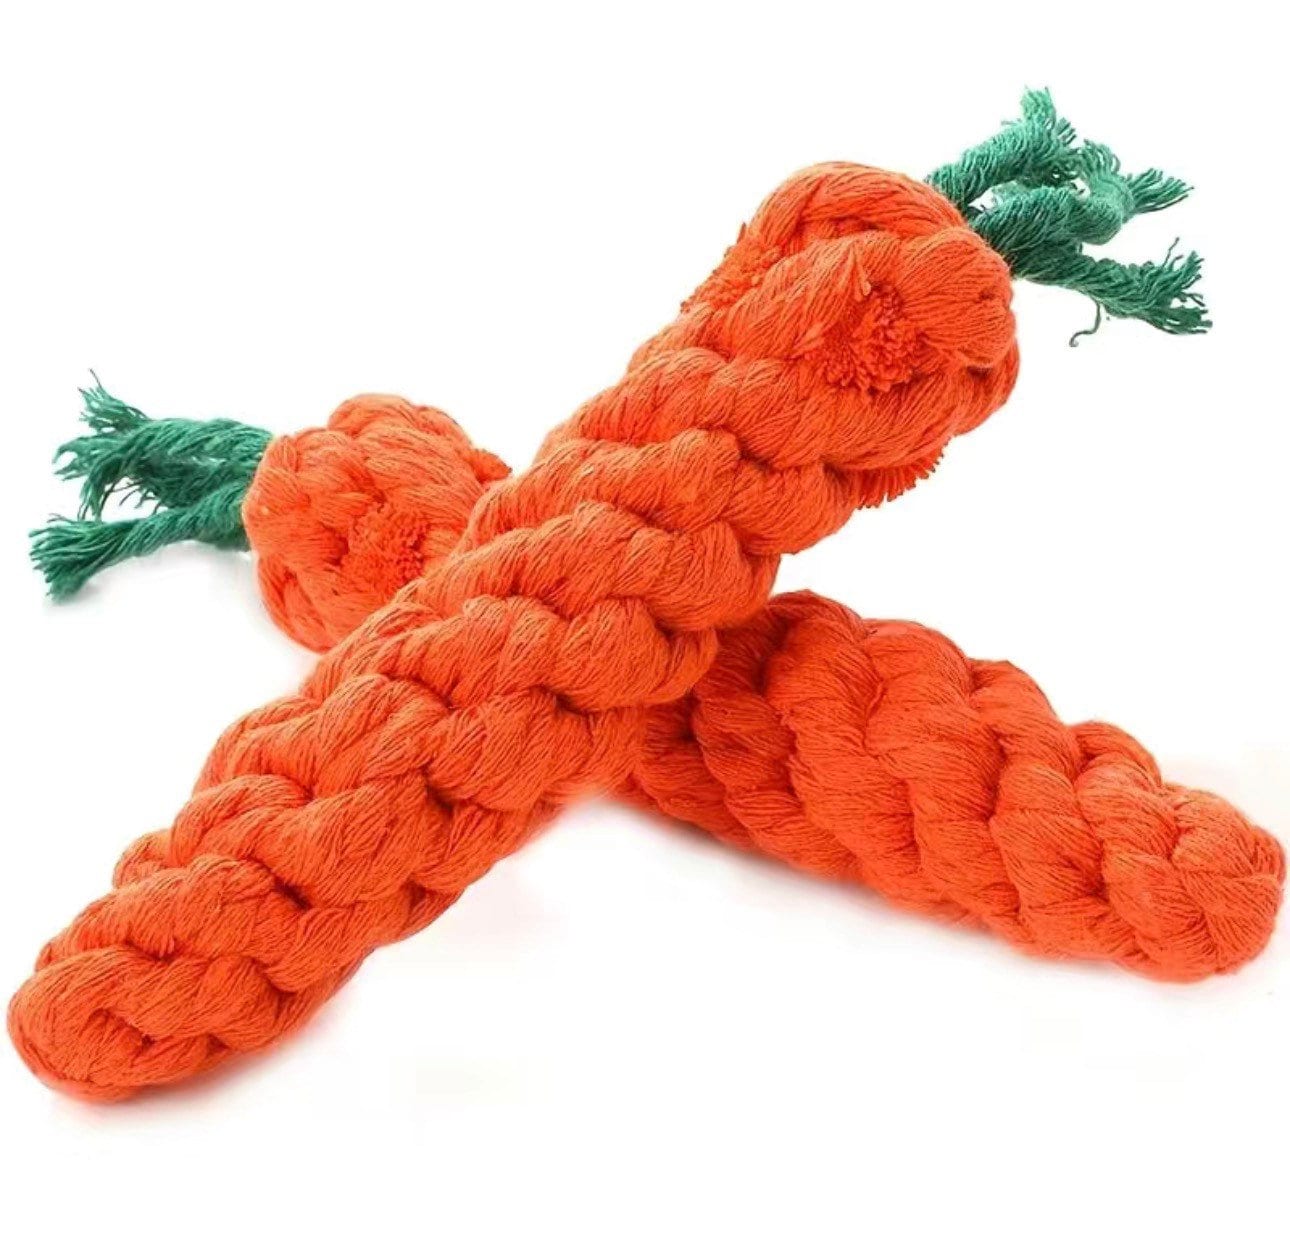 HUMLANJ 4 Pcs Easter Dog Squeaky Toys, Plush Easter Egg Dog Toy Bunny  Stuffed Dog Toys with Crinkle Paper Interactive Rope Carrot Dog Chew Toy  Easter